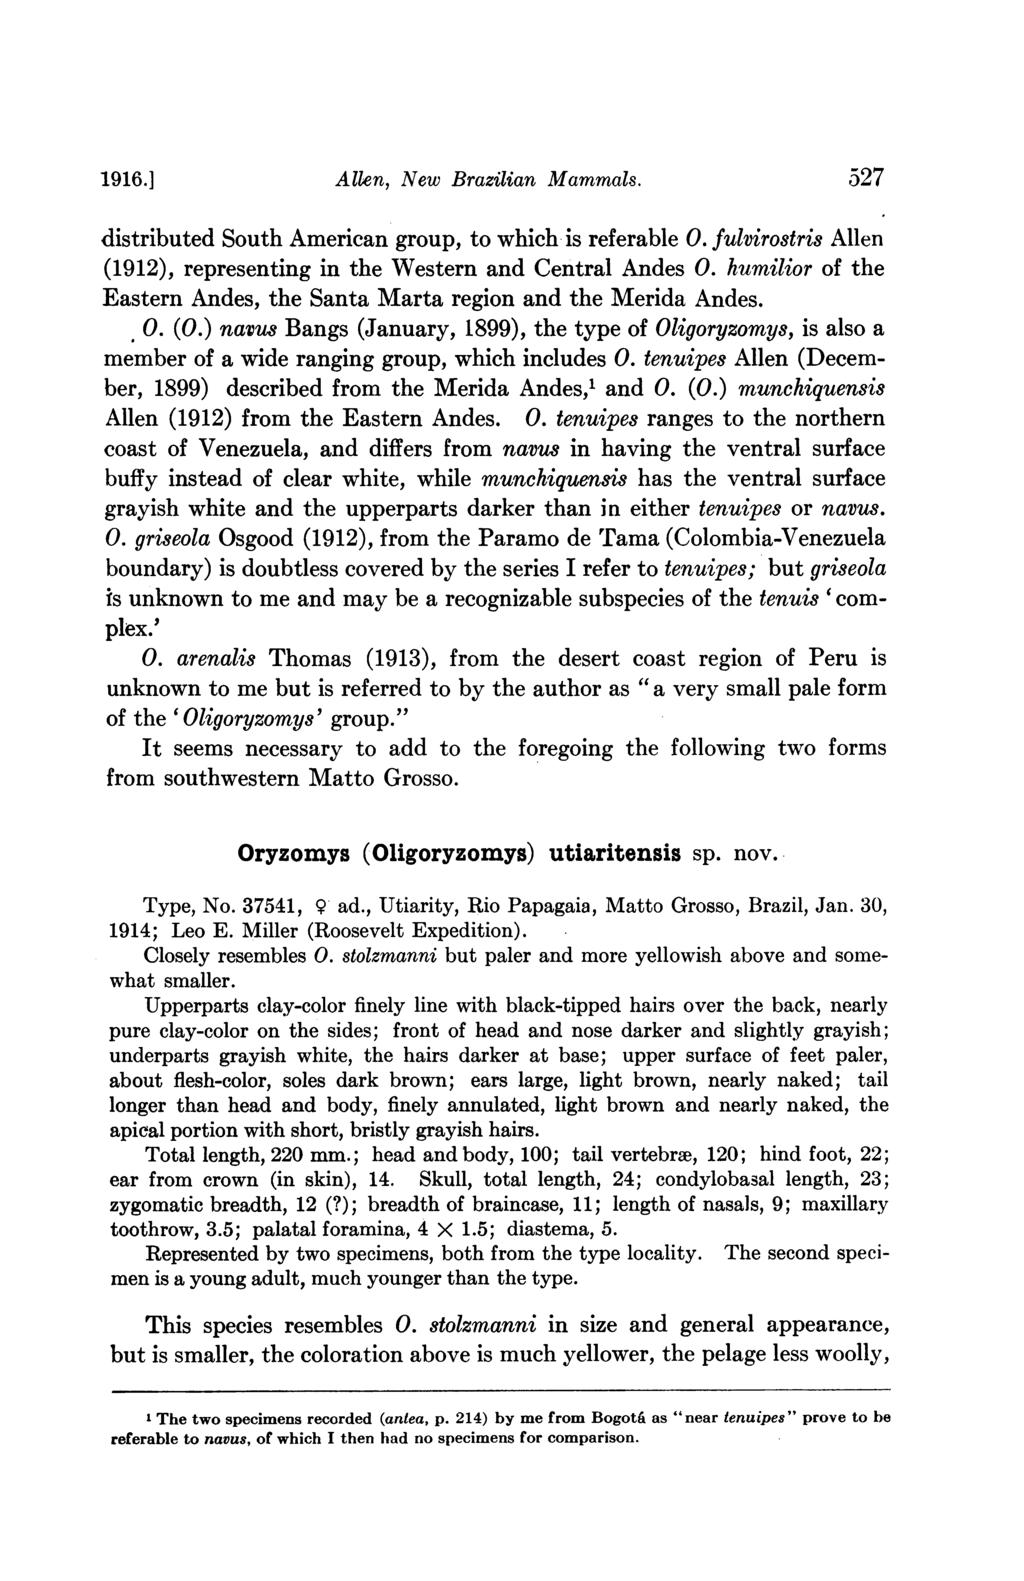 1916.] Allen, New Brazilian Mammals. 527 distributed South American group, to which is referable 0. fulvirostris Allen (1912), representing in the Western and Central Andes 0.